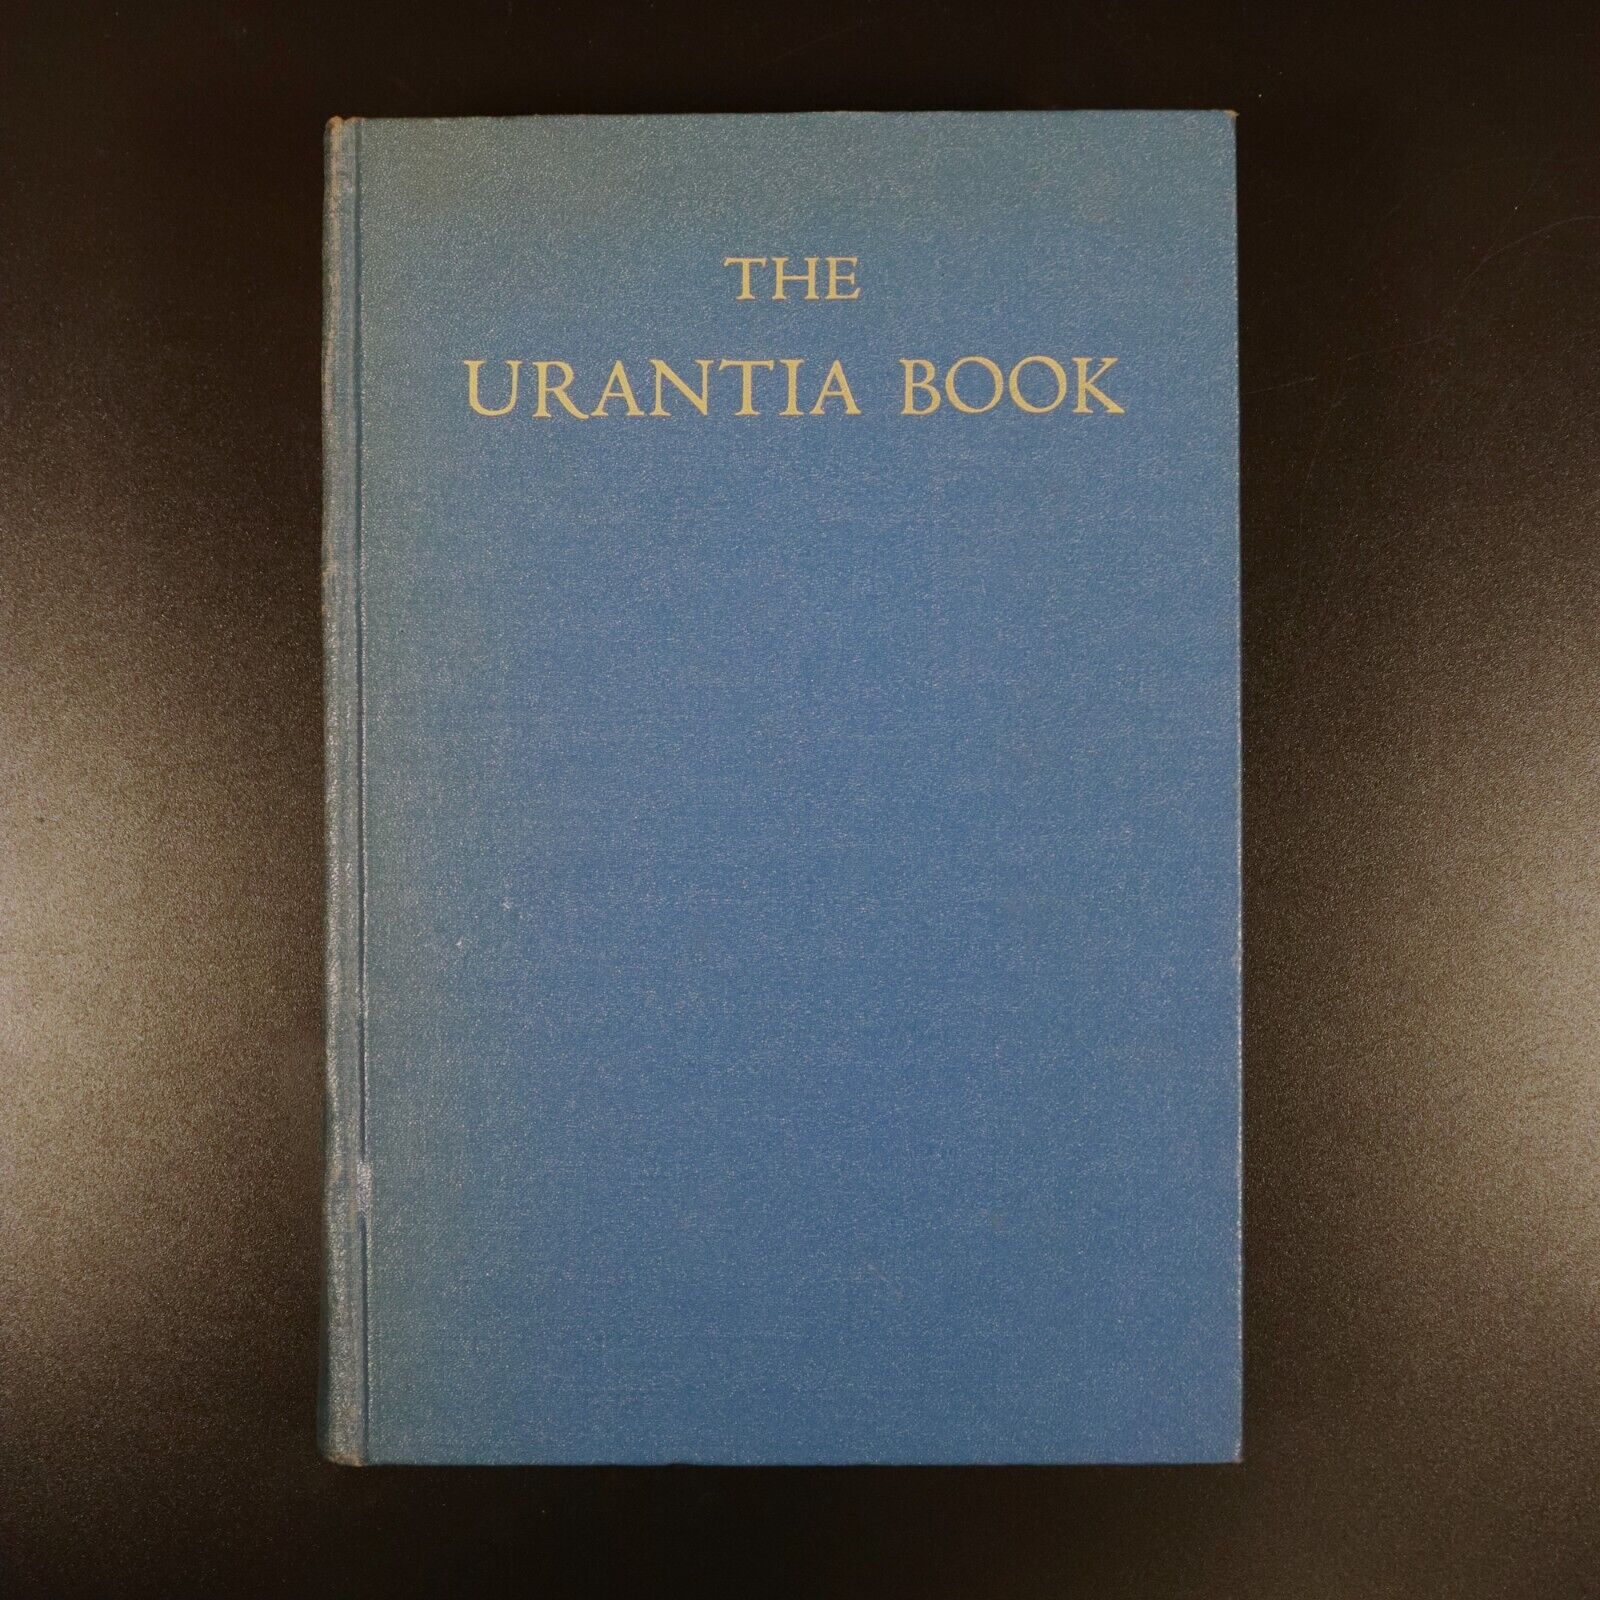 1955 The Urantia Book 1st Edition 1st Printing Vintage Religious Philosophy Book